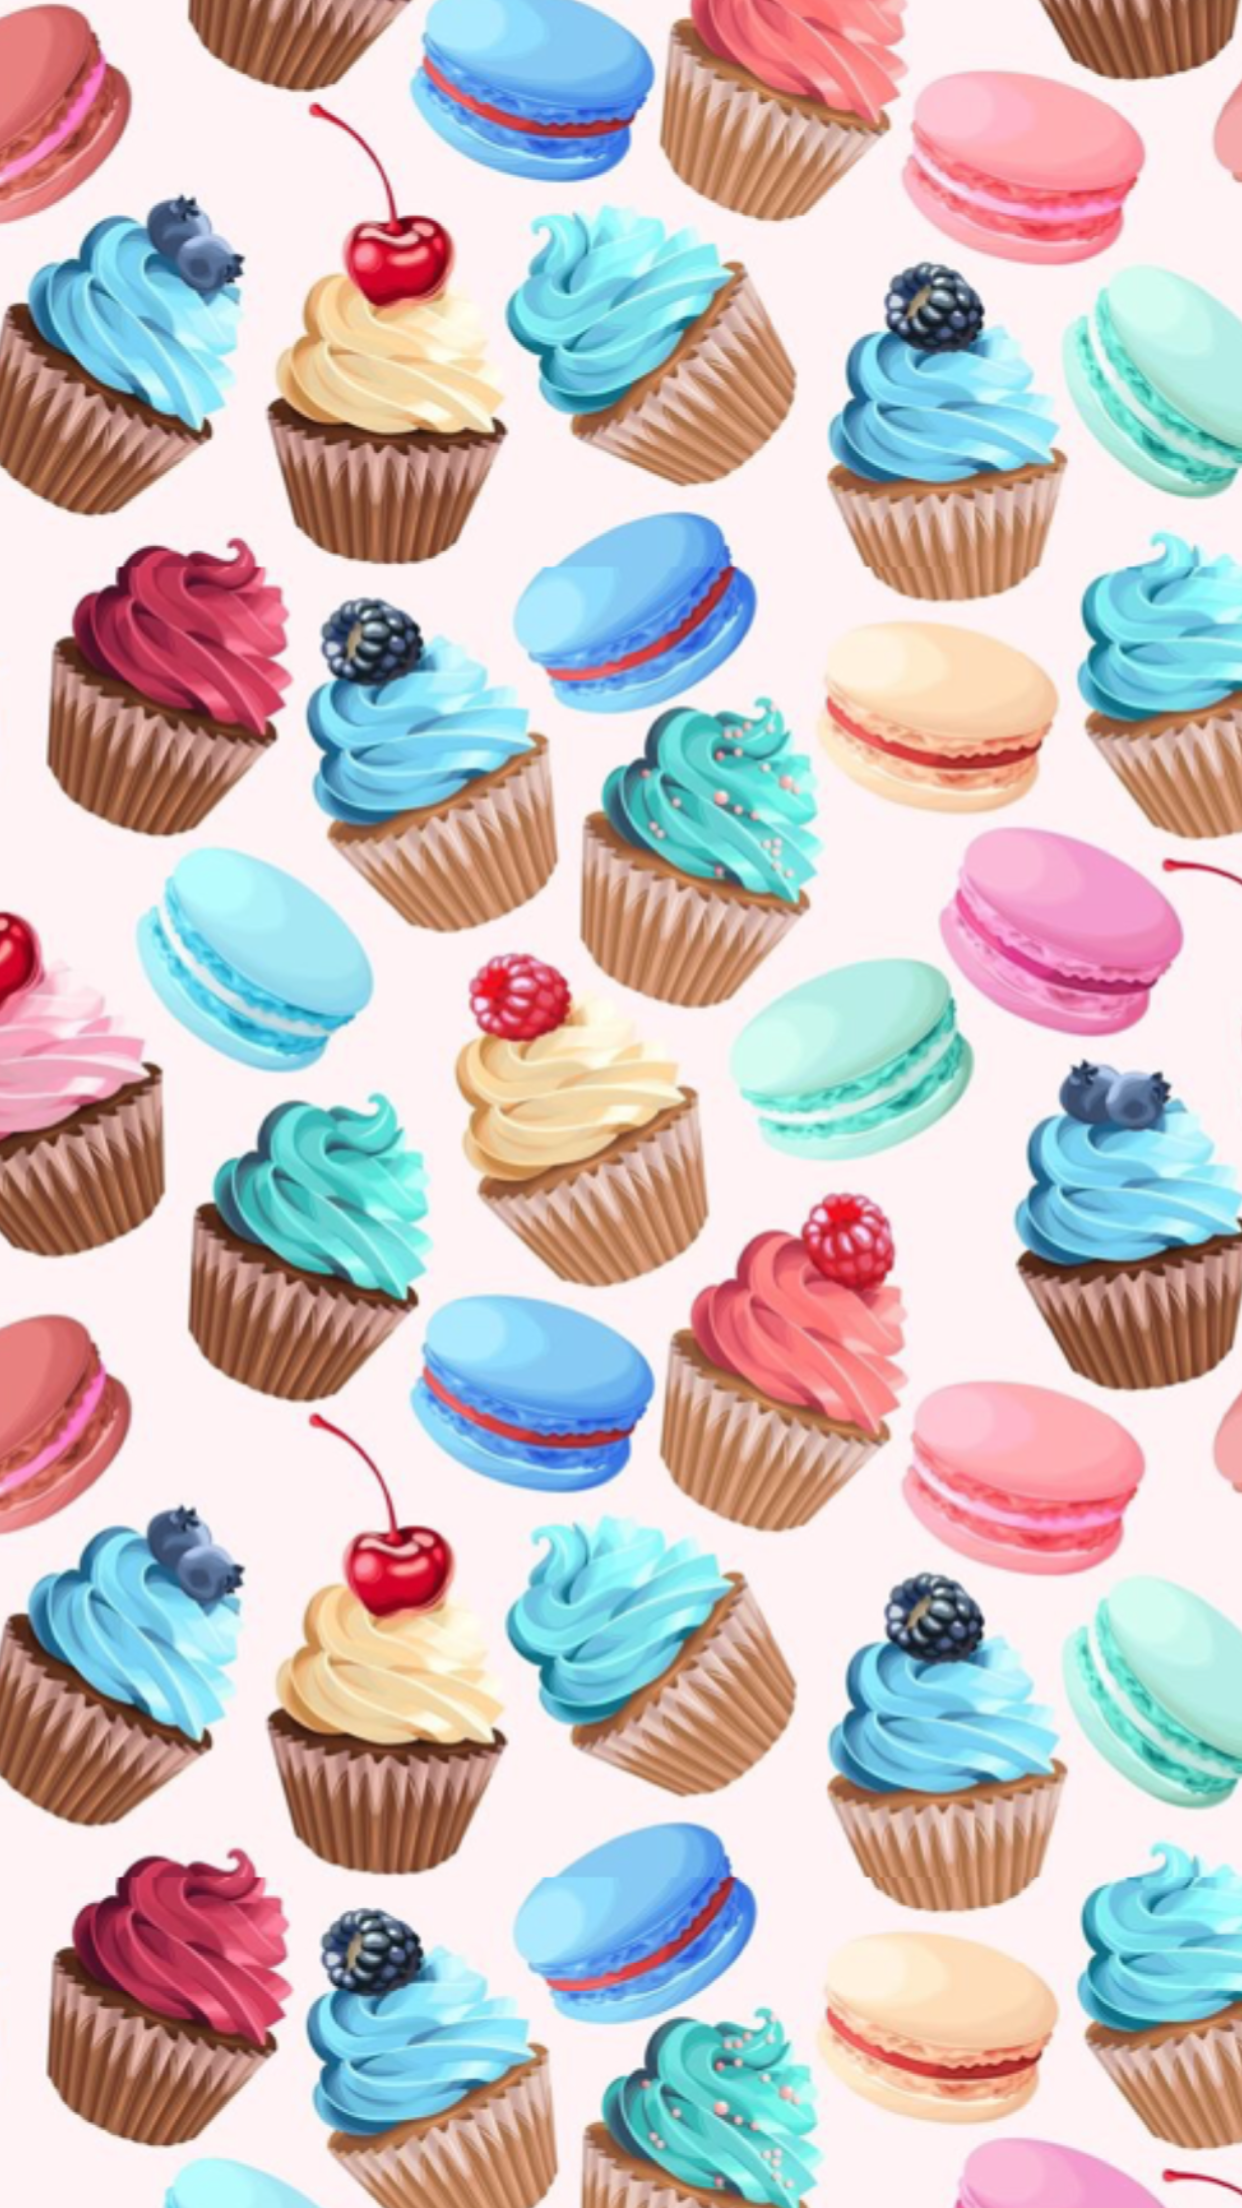 Cupcakes iPhone Wallpaper Free Cupcakes iPhone Background